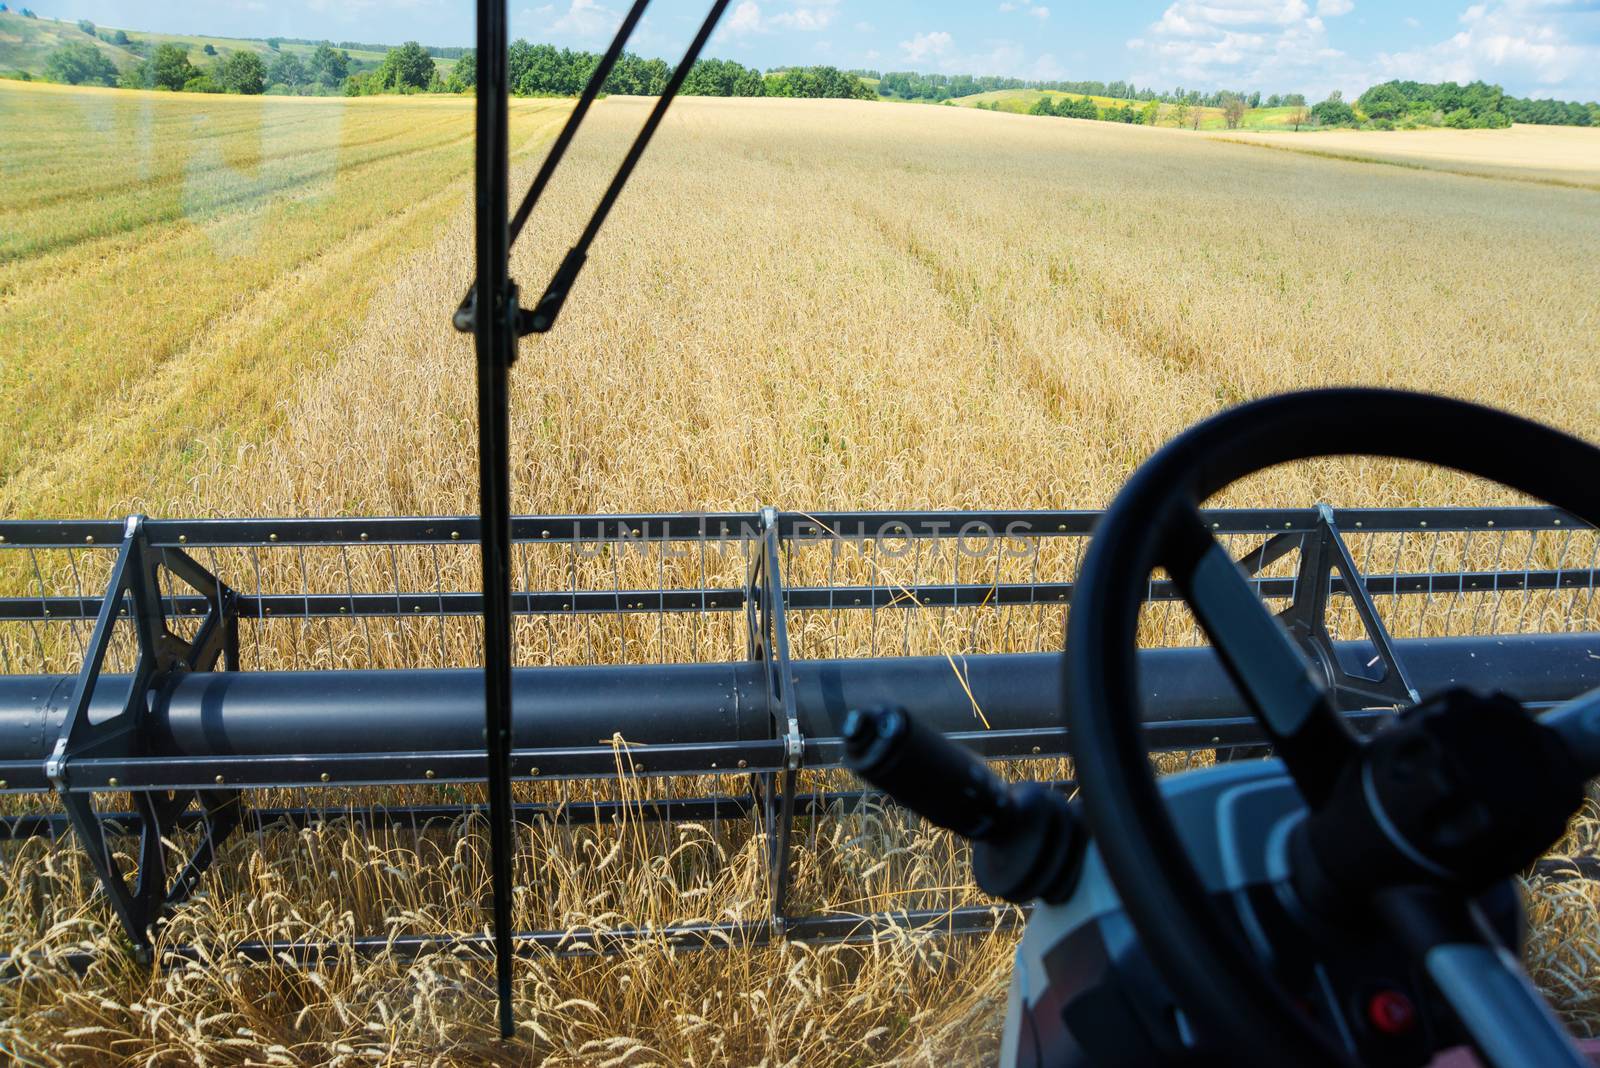 Harvesting the wheat field: the view from the cabin of a combine harvester